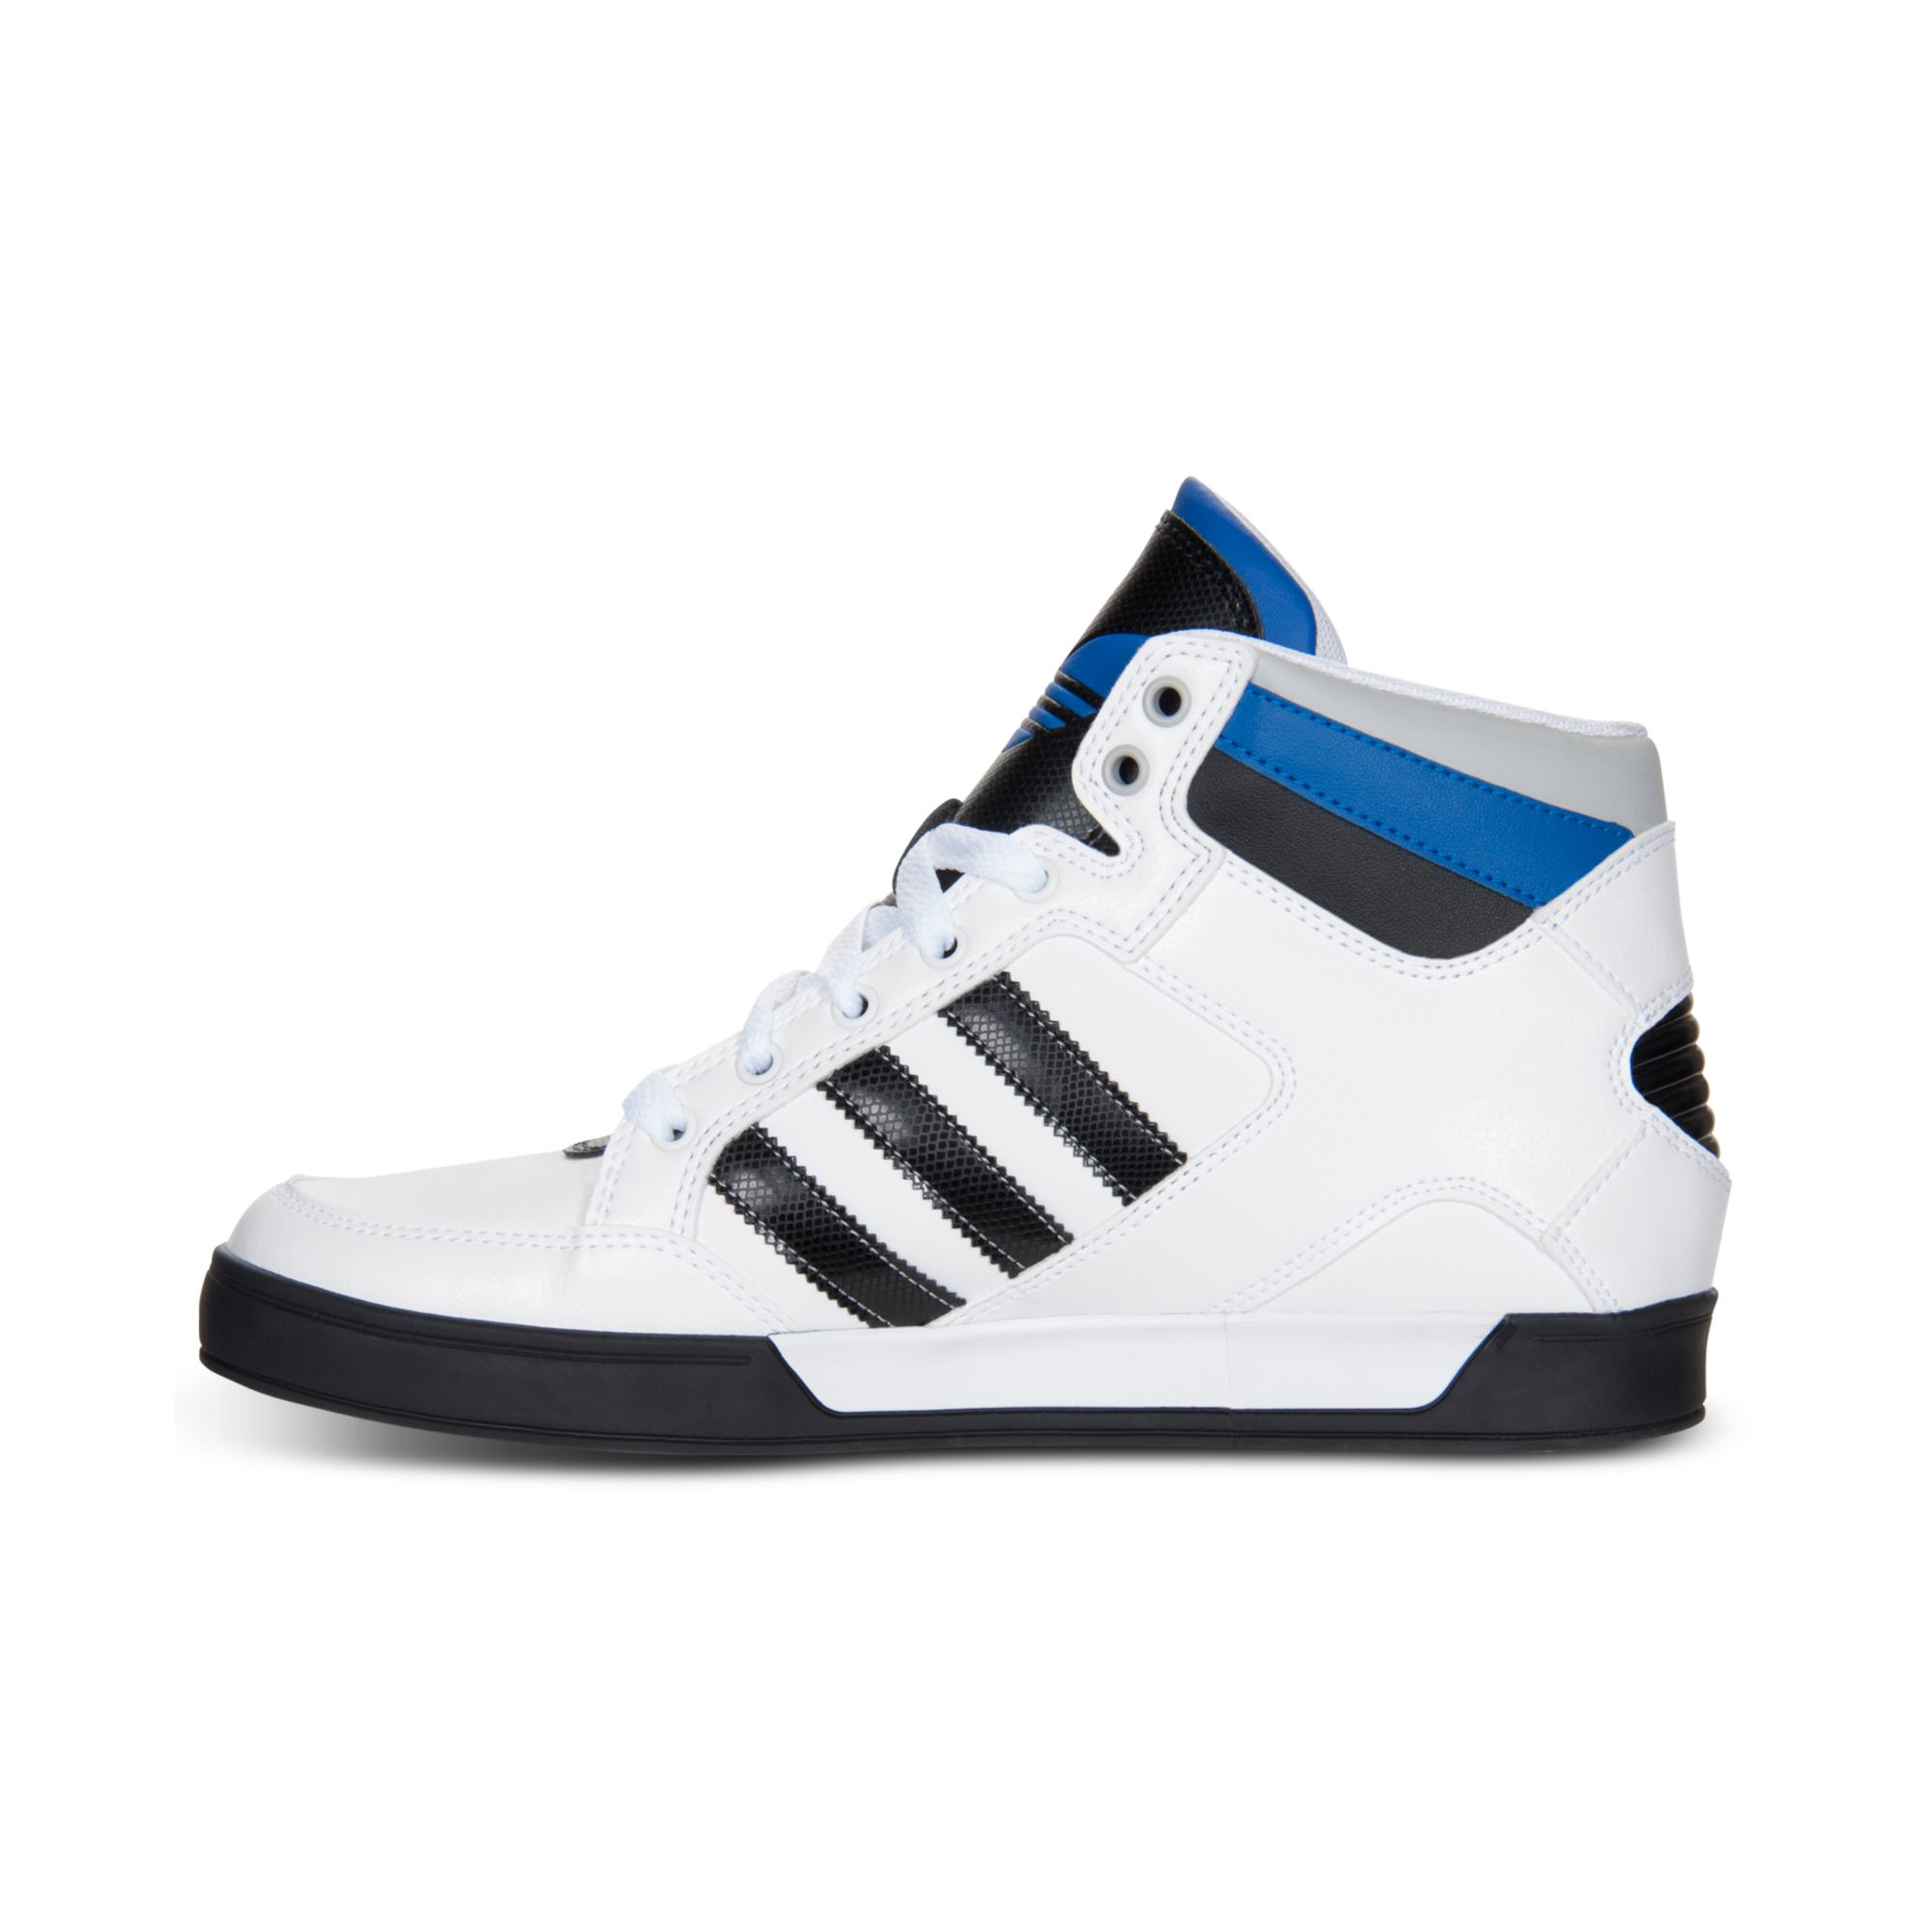 adidas Originals Hard Court Hi Casual Sneakers in White/Black/Blue ... اودو